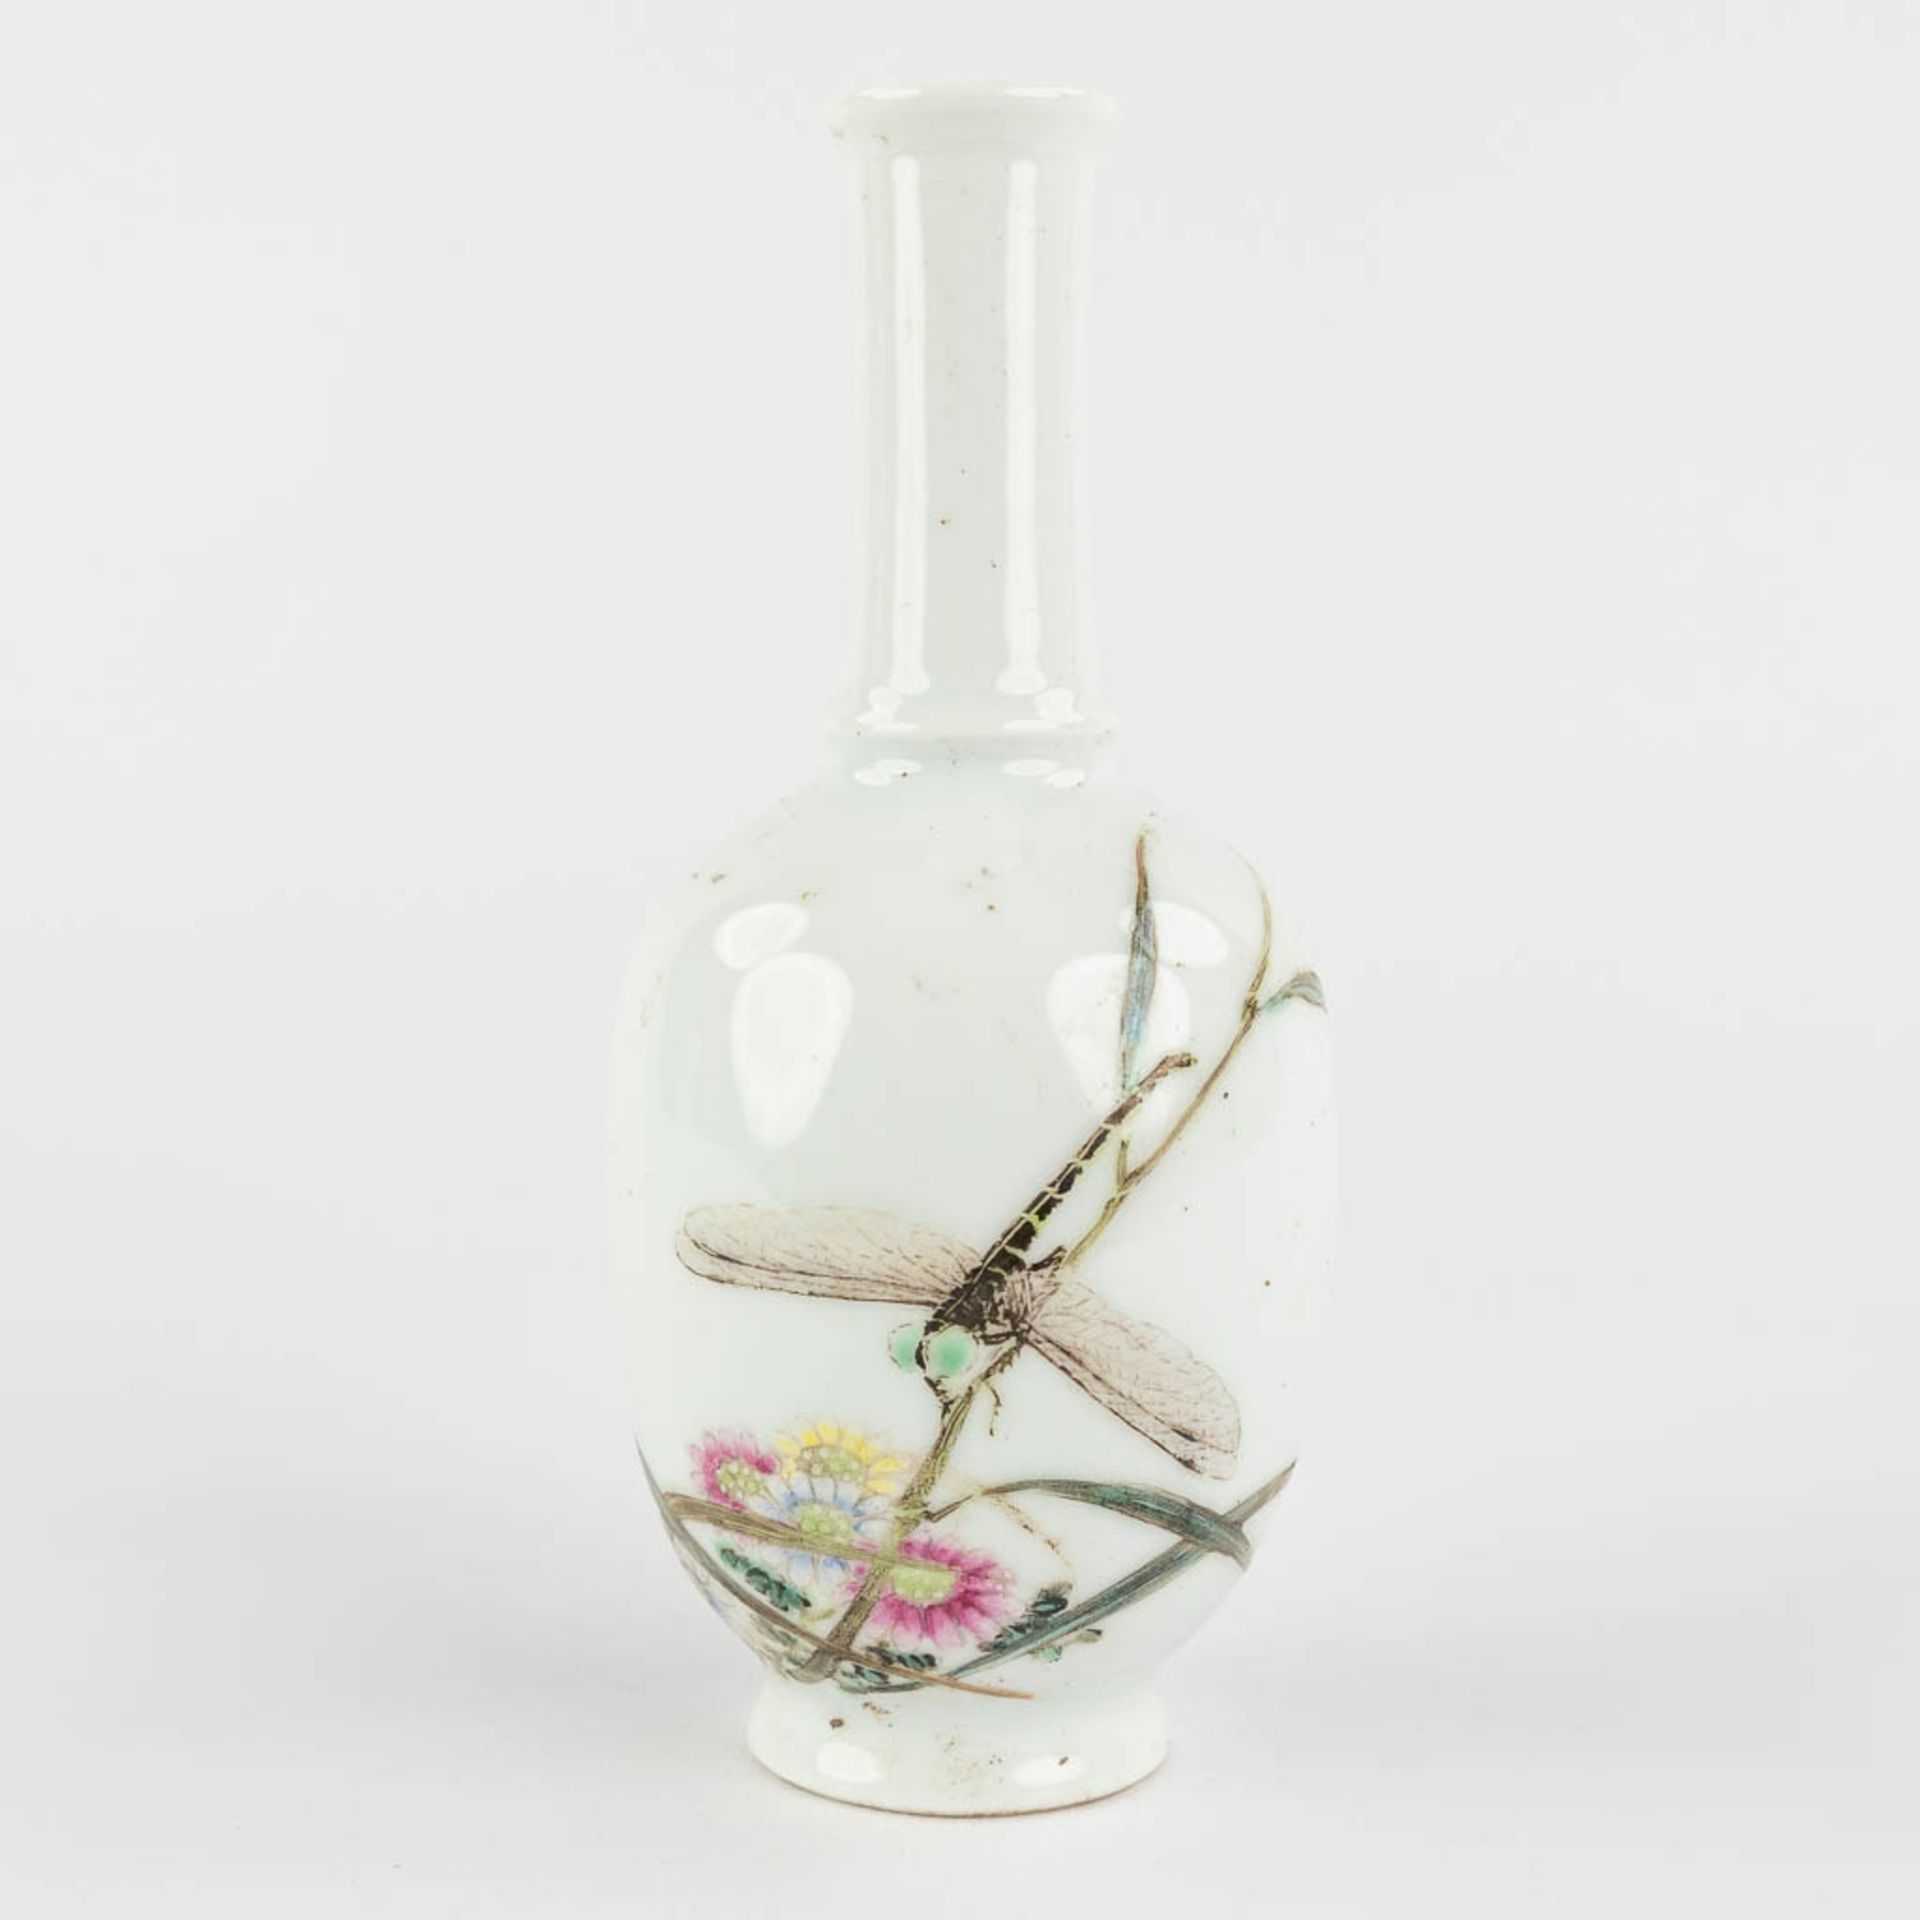 Li mingliang, A Chinese vase with decor of a dragonfly. 20th C. (H:14 x D:6,5 cm)